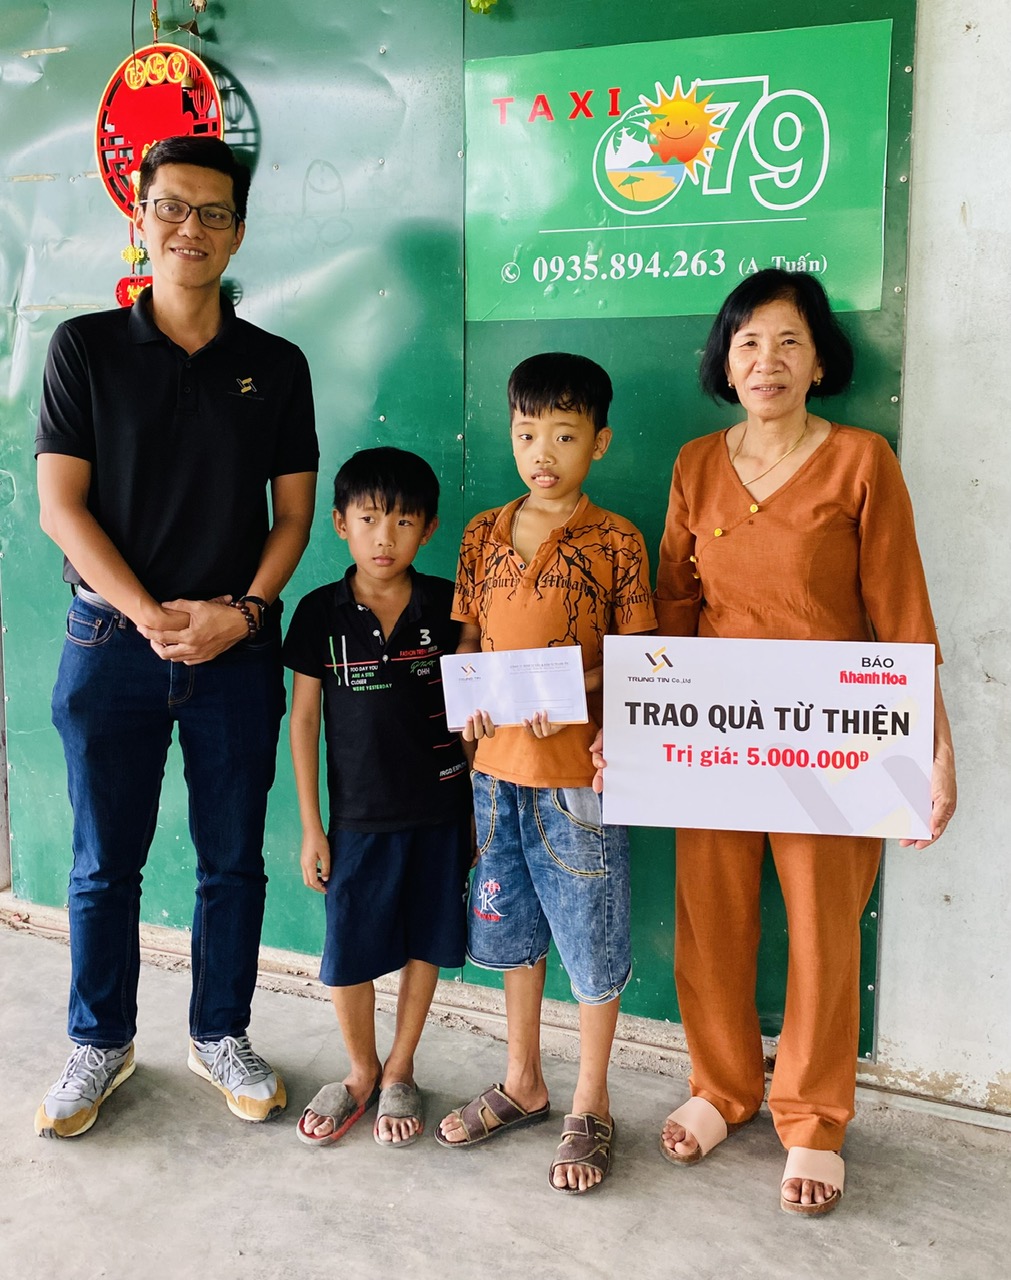 Do Nguyen, deputy director of Trung Tin Co., Ltd., giving the donation to the family 

